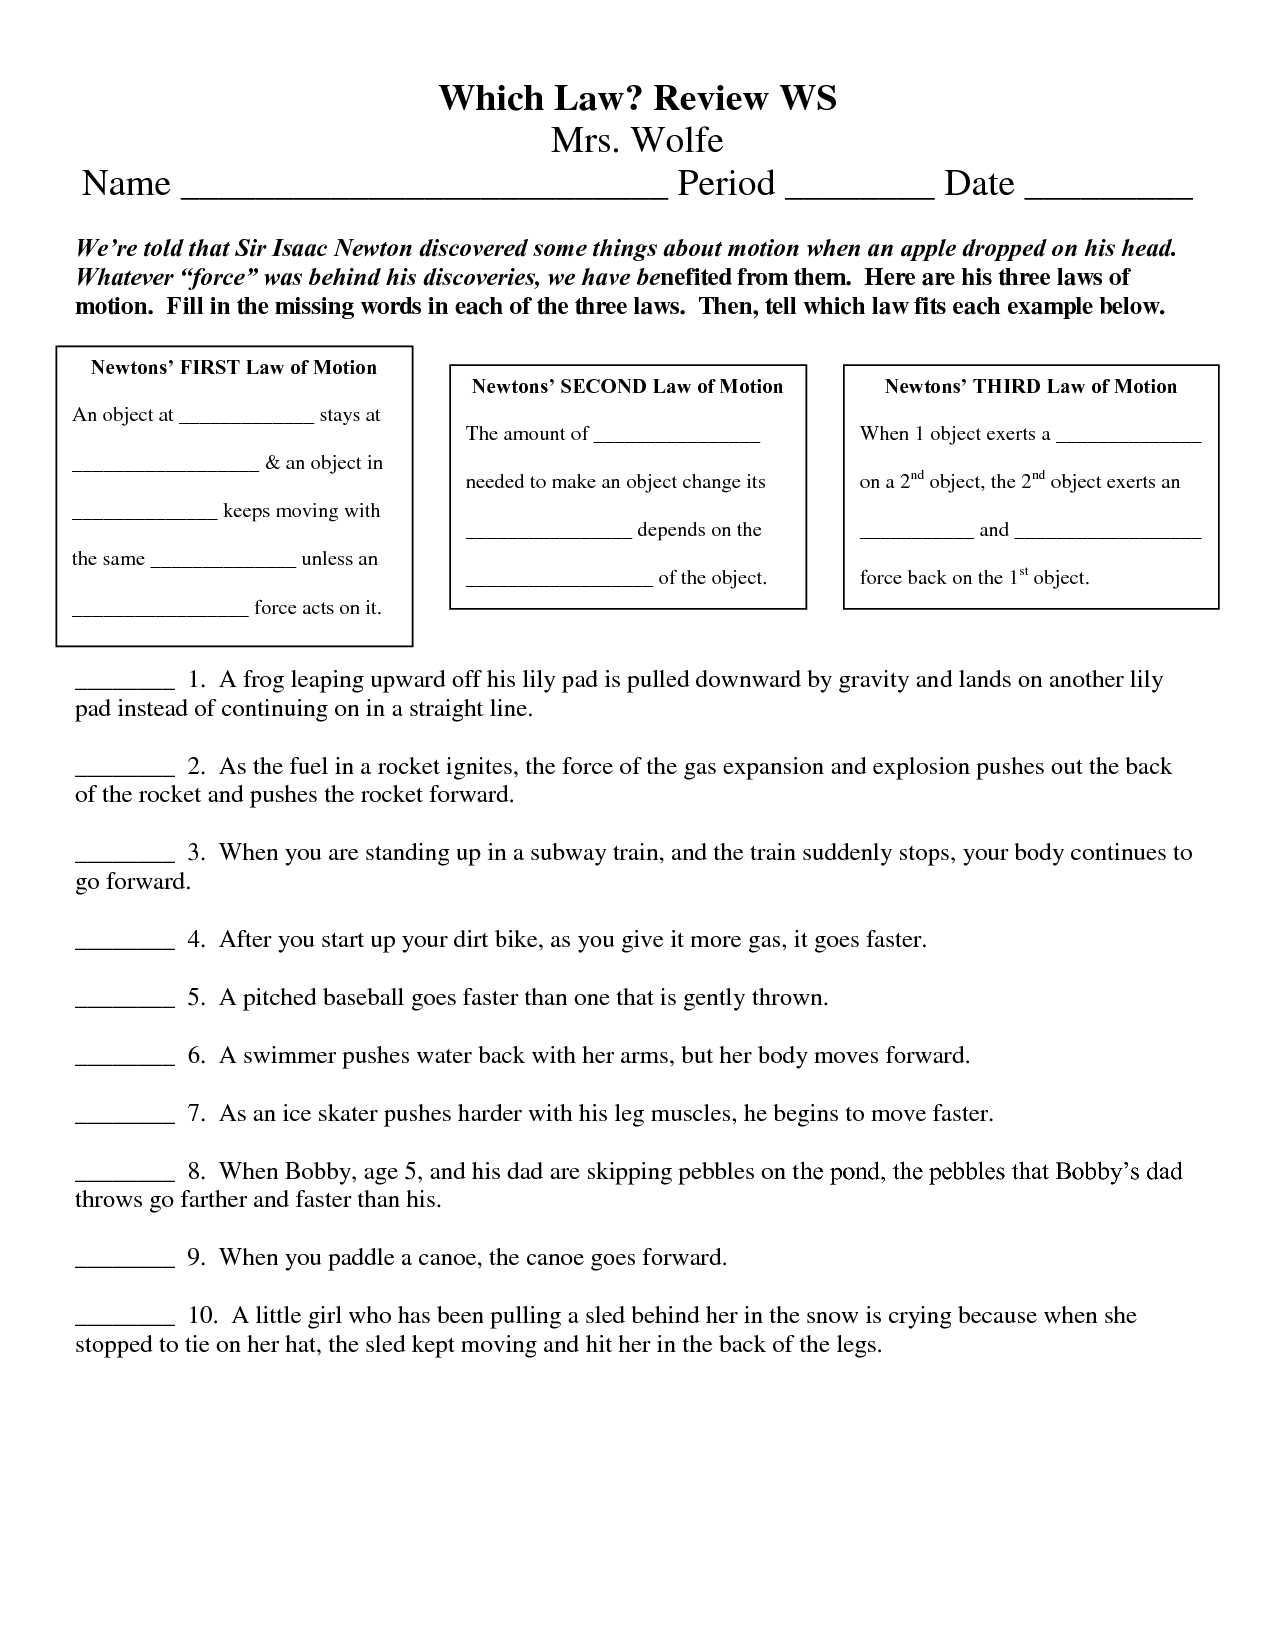 Velocity Worksheet with Answers together with 3 Laws Of Motion Worksheets